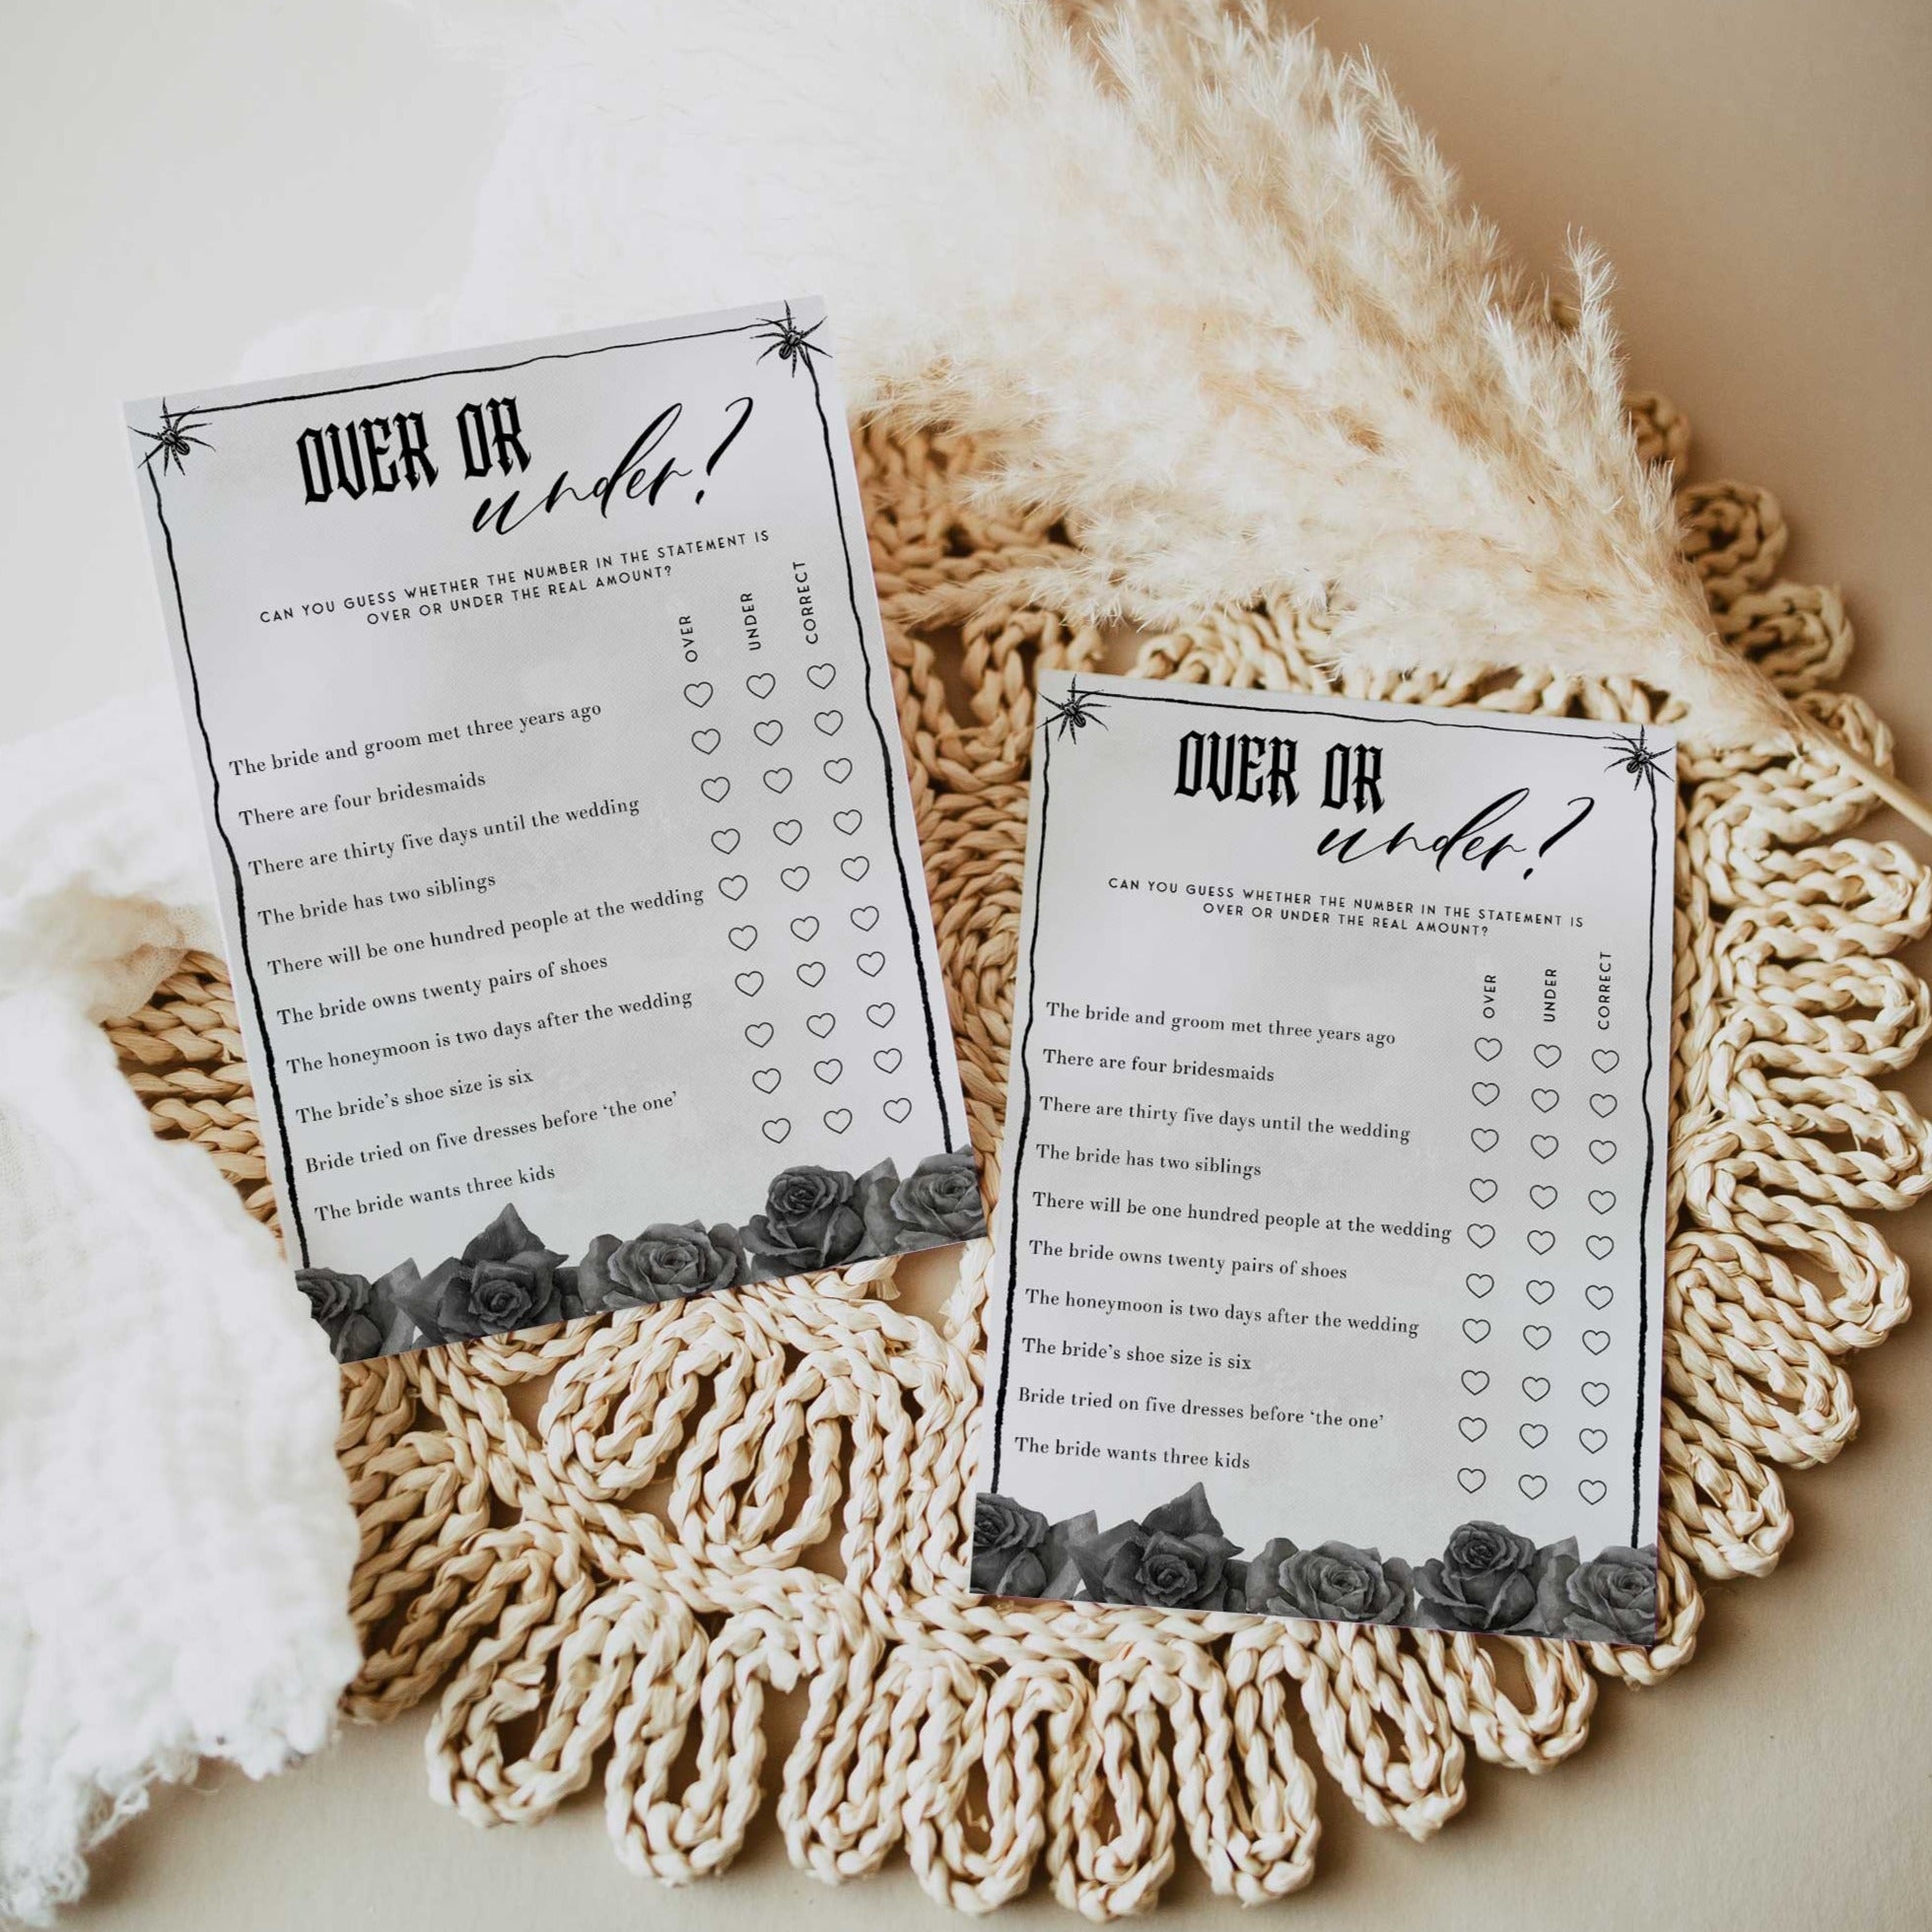 Fully editable and printable bridal shower over or under game with a gothic design. Perfect for a Bride or Die or Death Us To Party bridal shower themed party